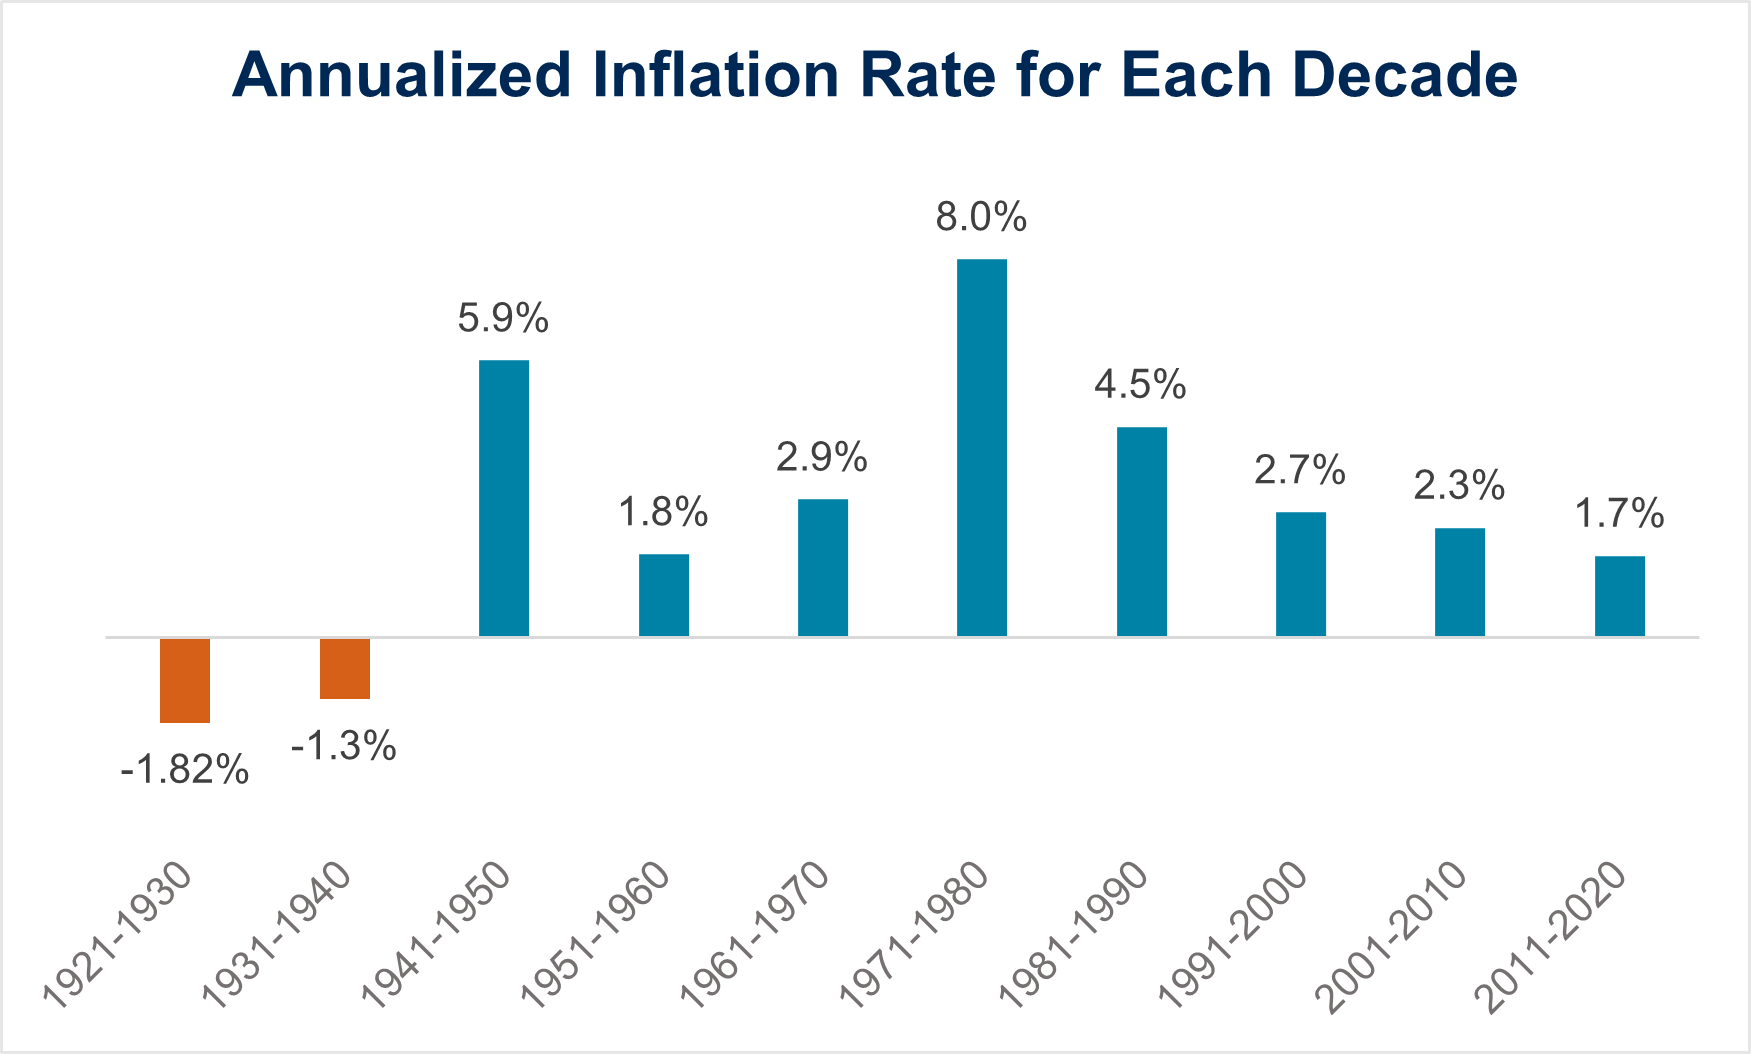 The chart illustrates the annualized inflation rate for each decade from 1921 to 2020